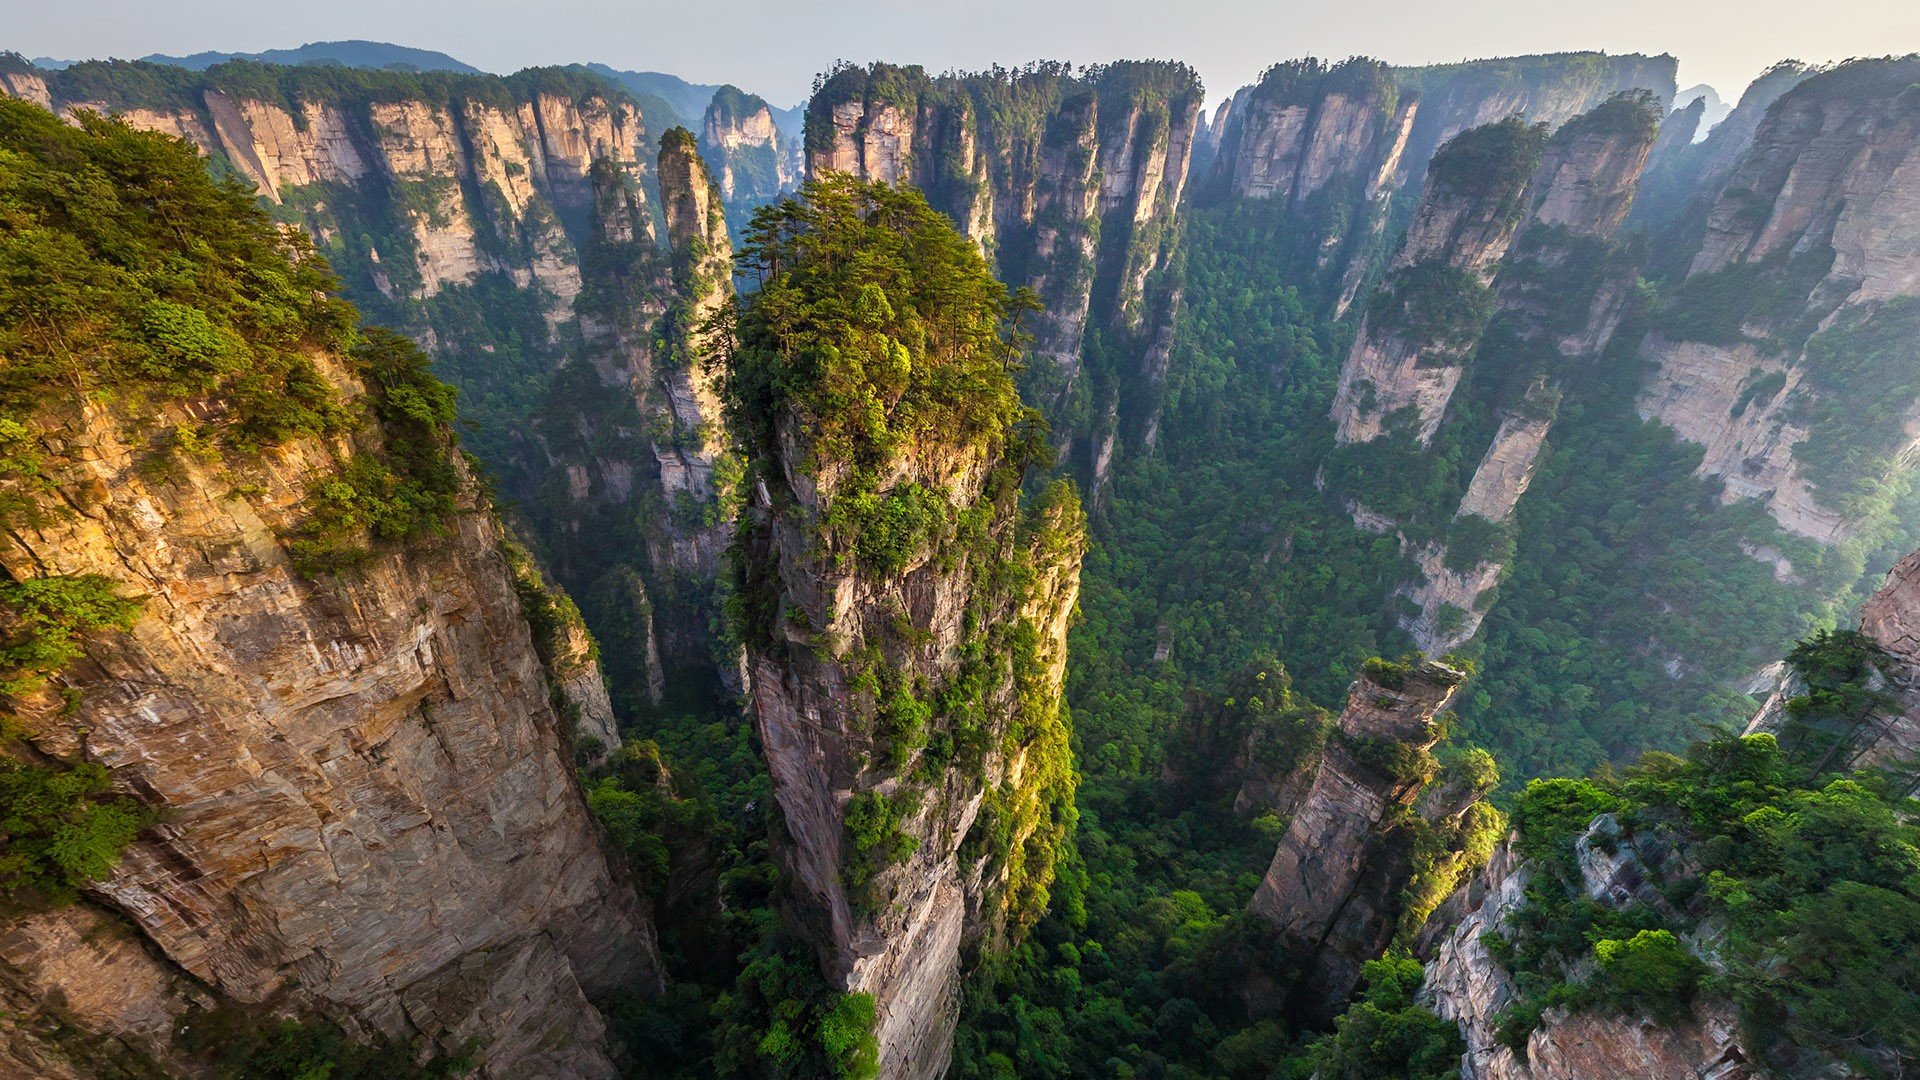 Aerial view of Avatar Mountains, Zhangjiajie National Forest Park, China. Windows 10 Spotlight Image